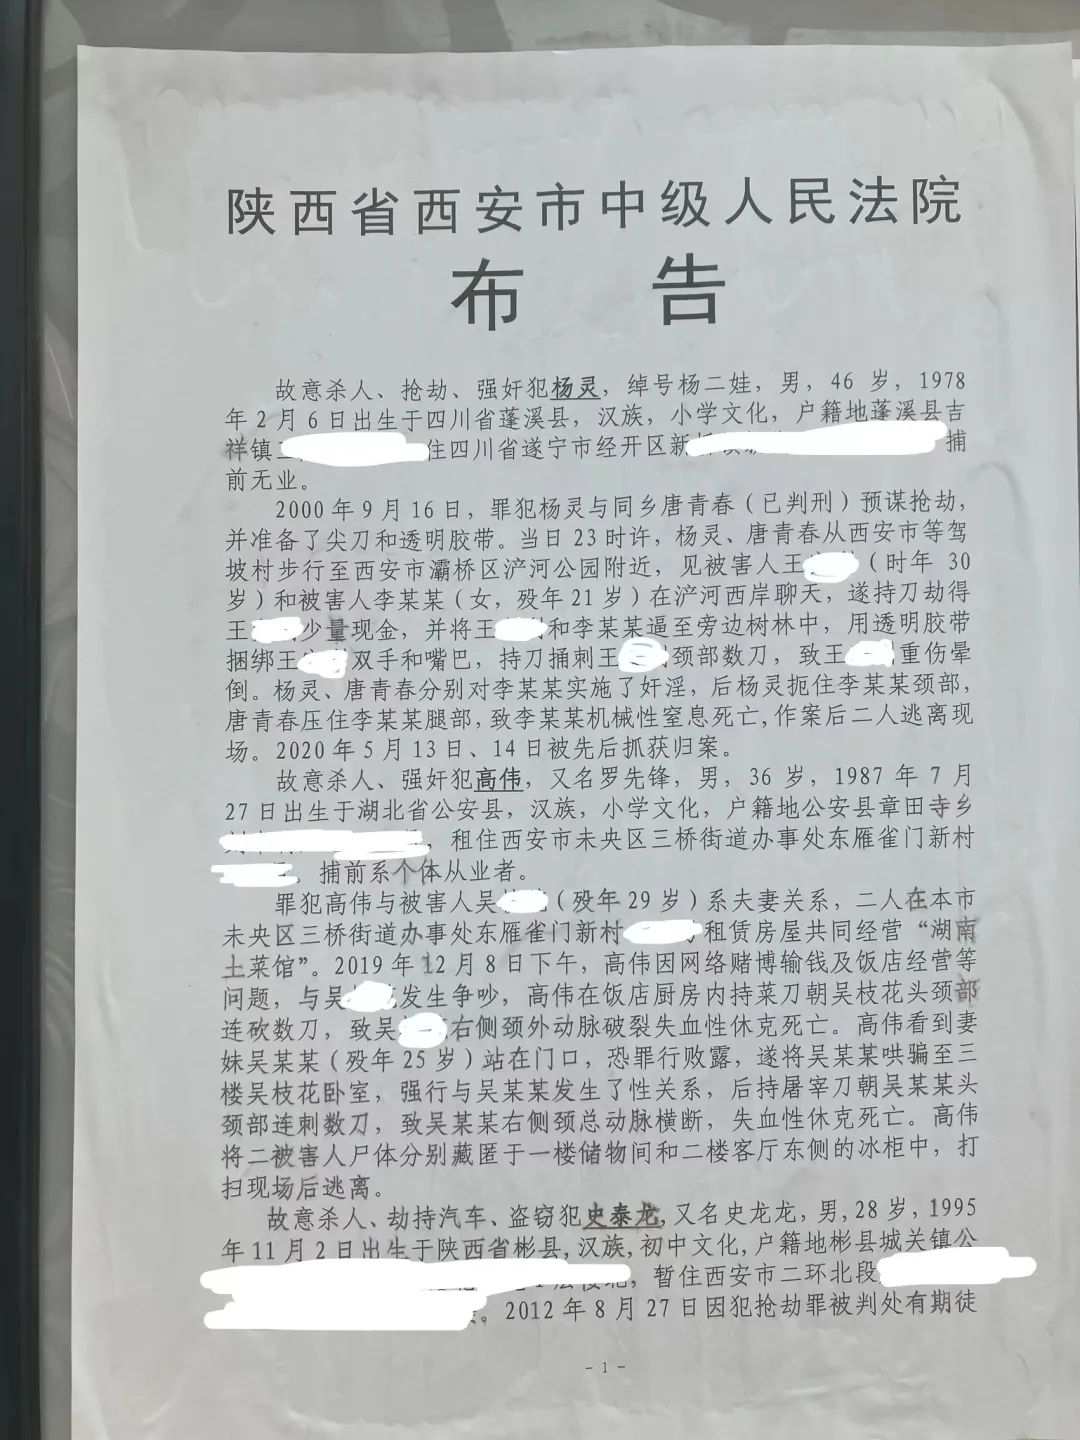 <strong>罪犯史泰龙被执行死刑</strong>